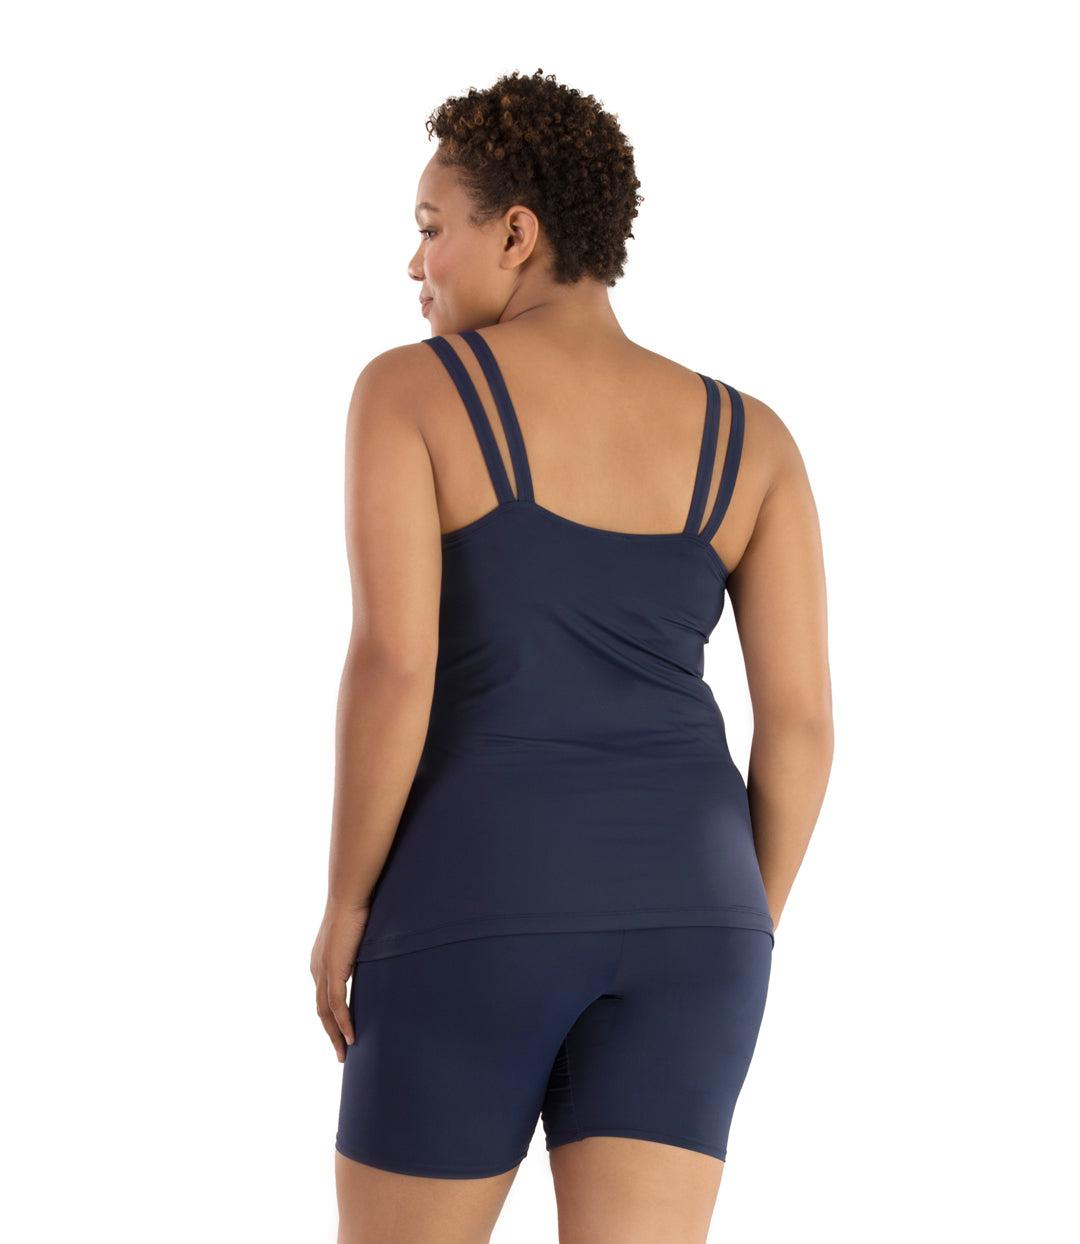 Plus size woman, facing back, wearing JunoActive plus size Junowear Hush Strappy Cami with Bra in Navy Blue. The woman is wearing a pair of Navy Blue Junowear Hush Boxer briefs.